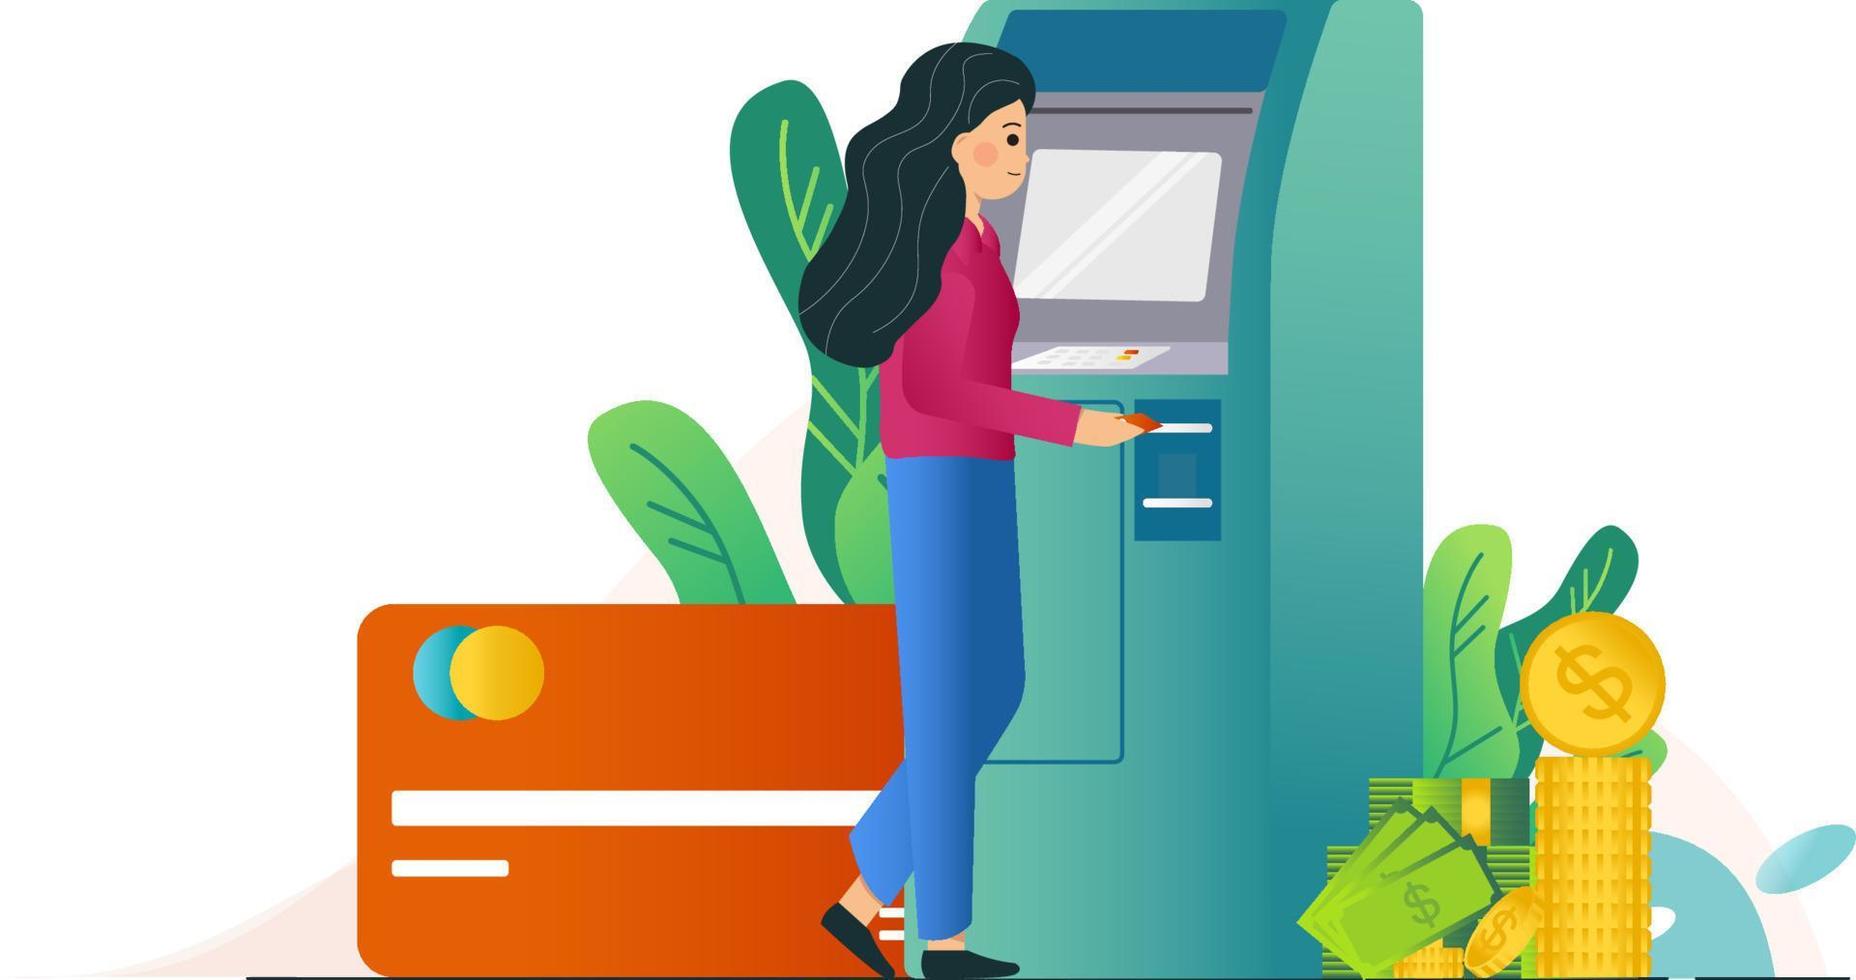 Young woman using ATM - Vector Illustration